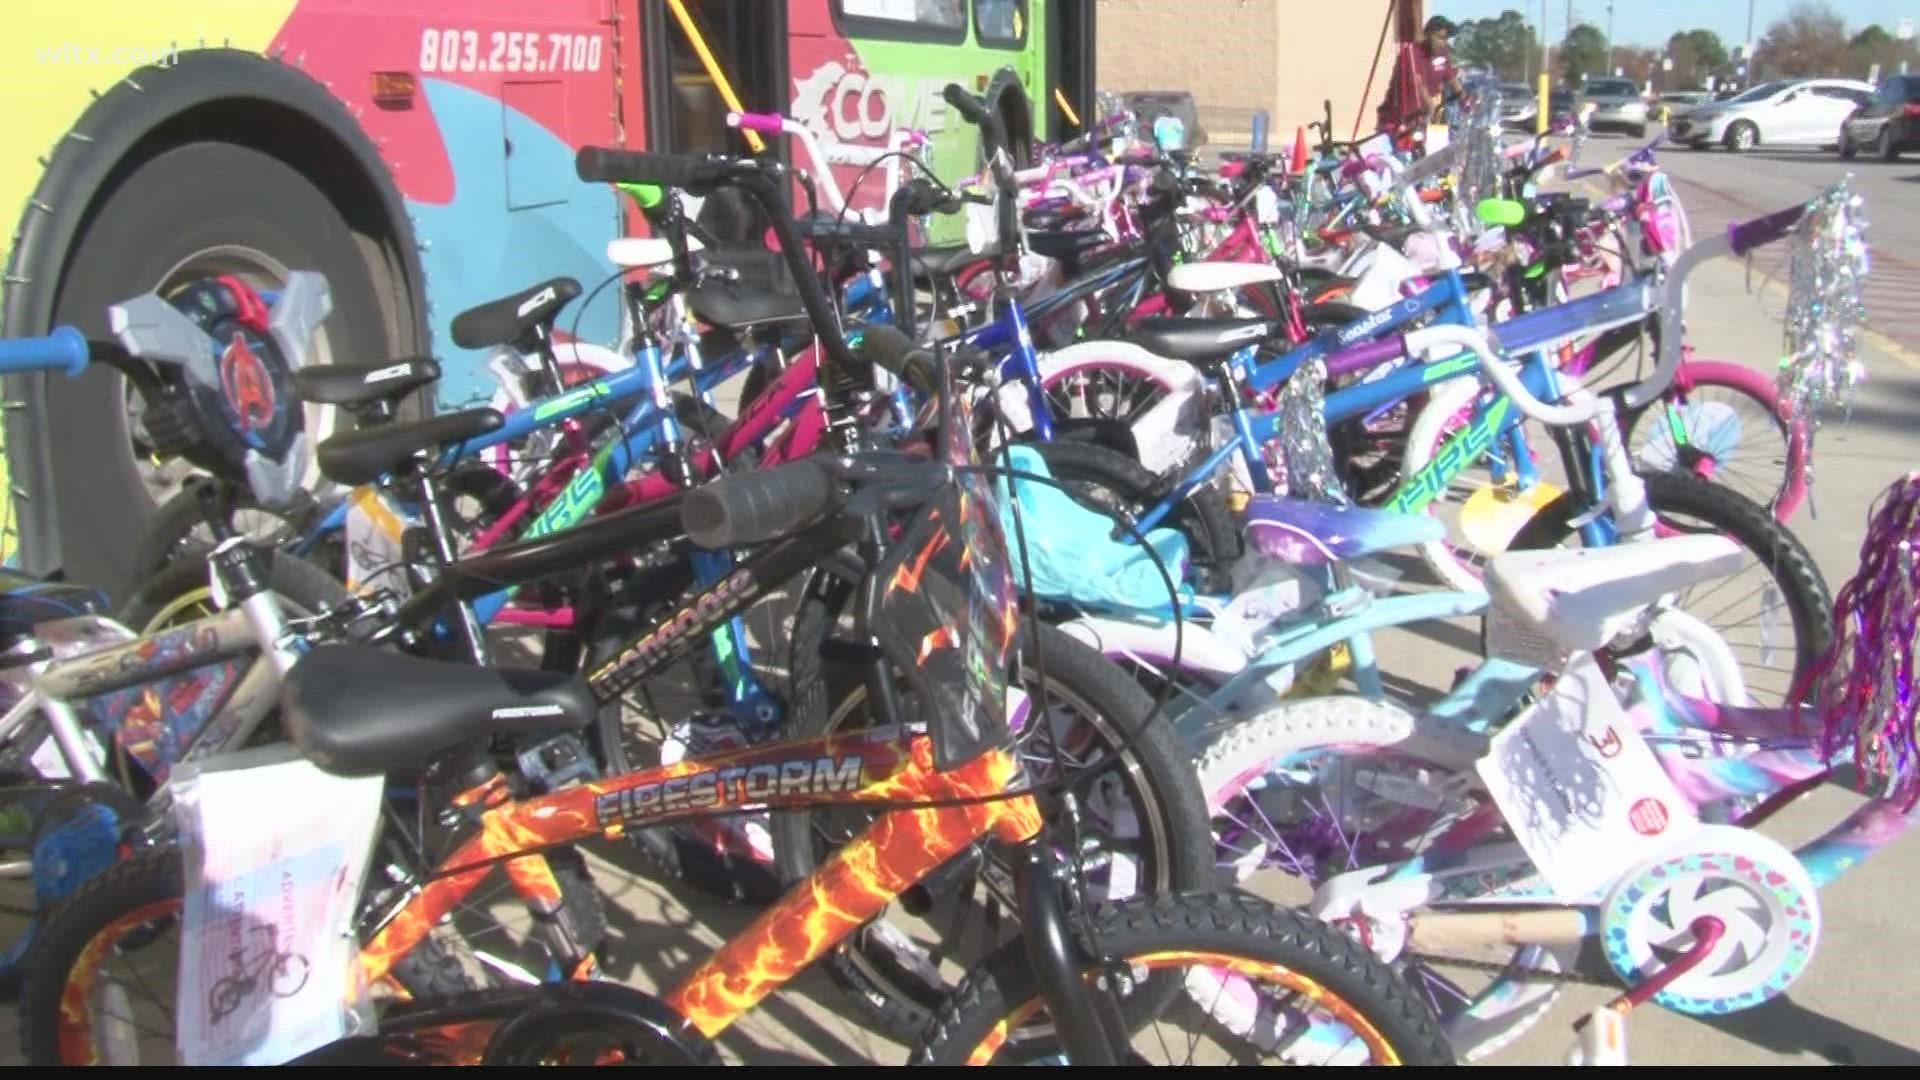 The Full Moon Club went to the Walmart in Lexington to donate dozens of bicycles to kids.